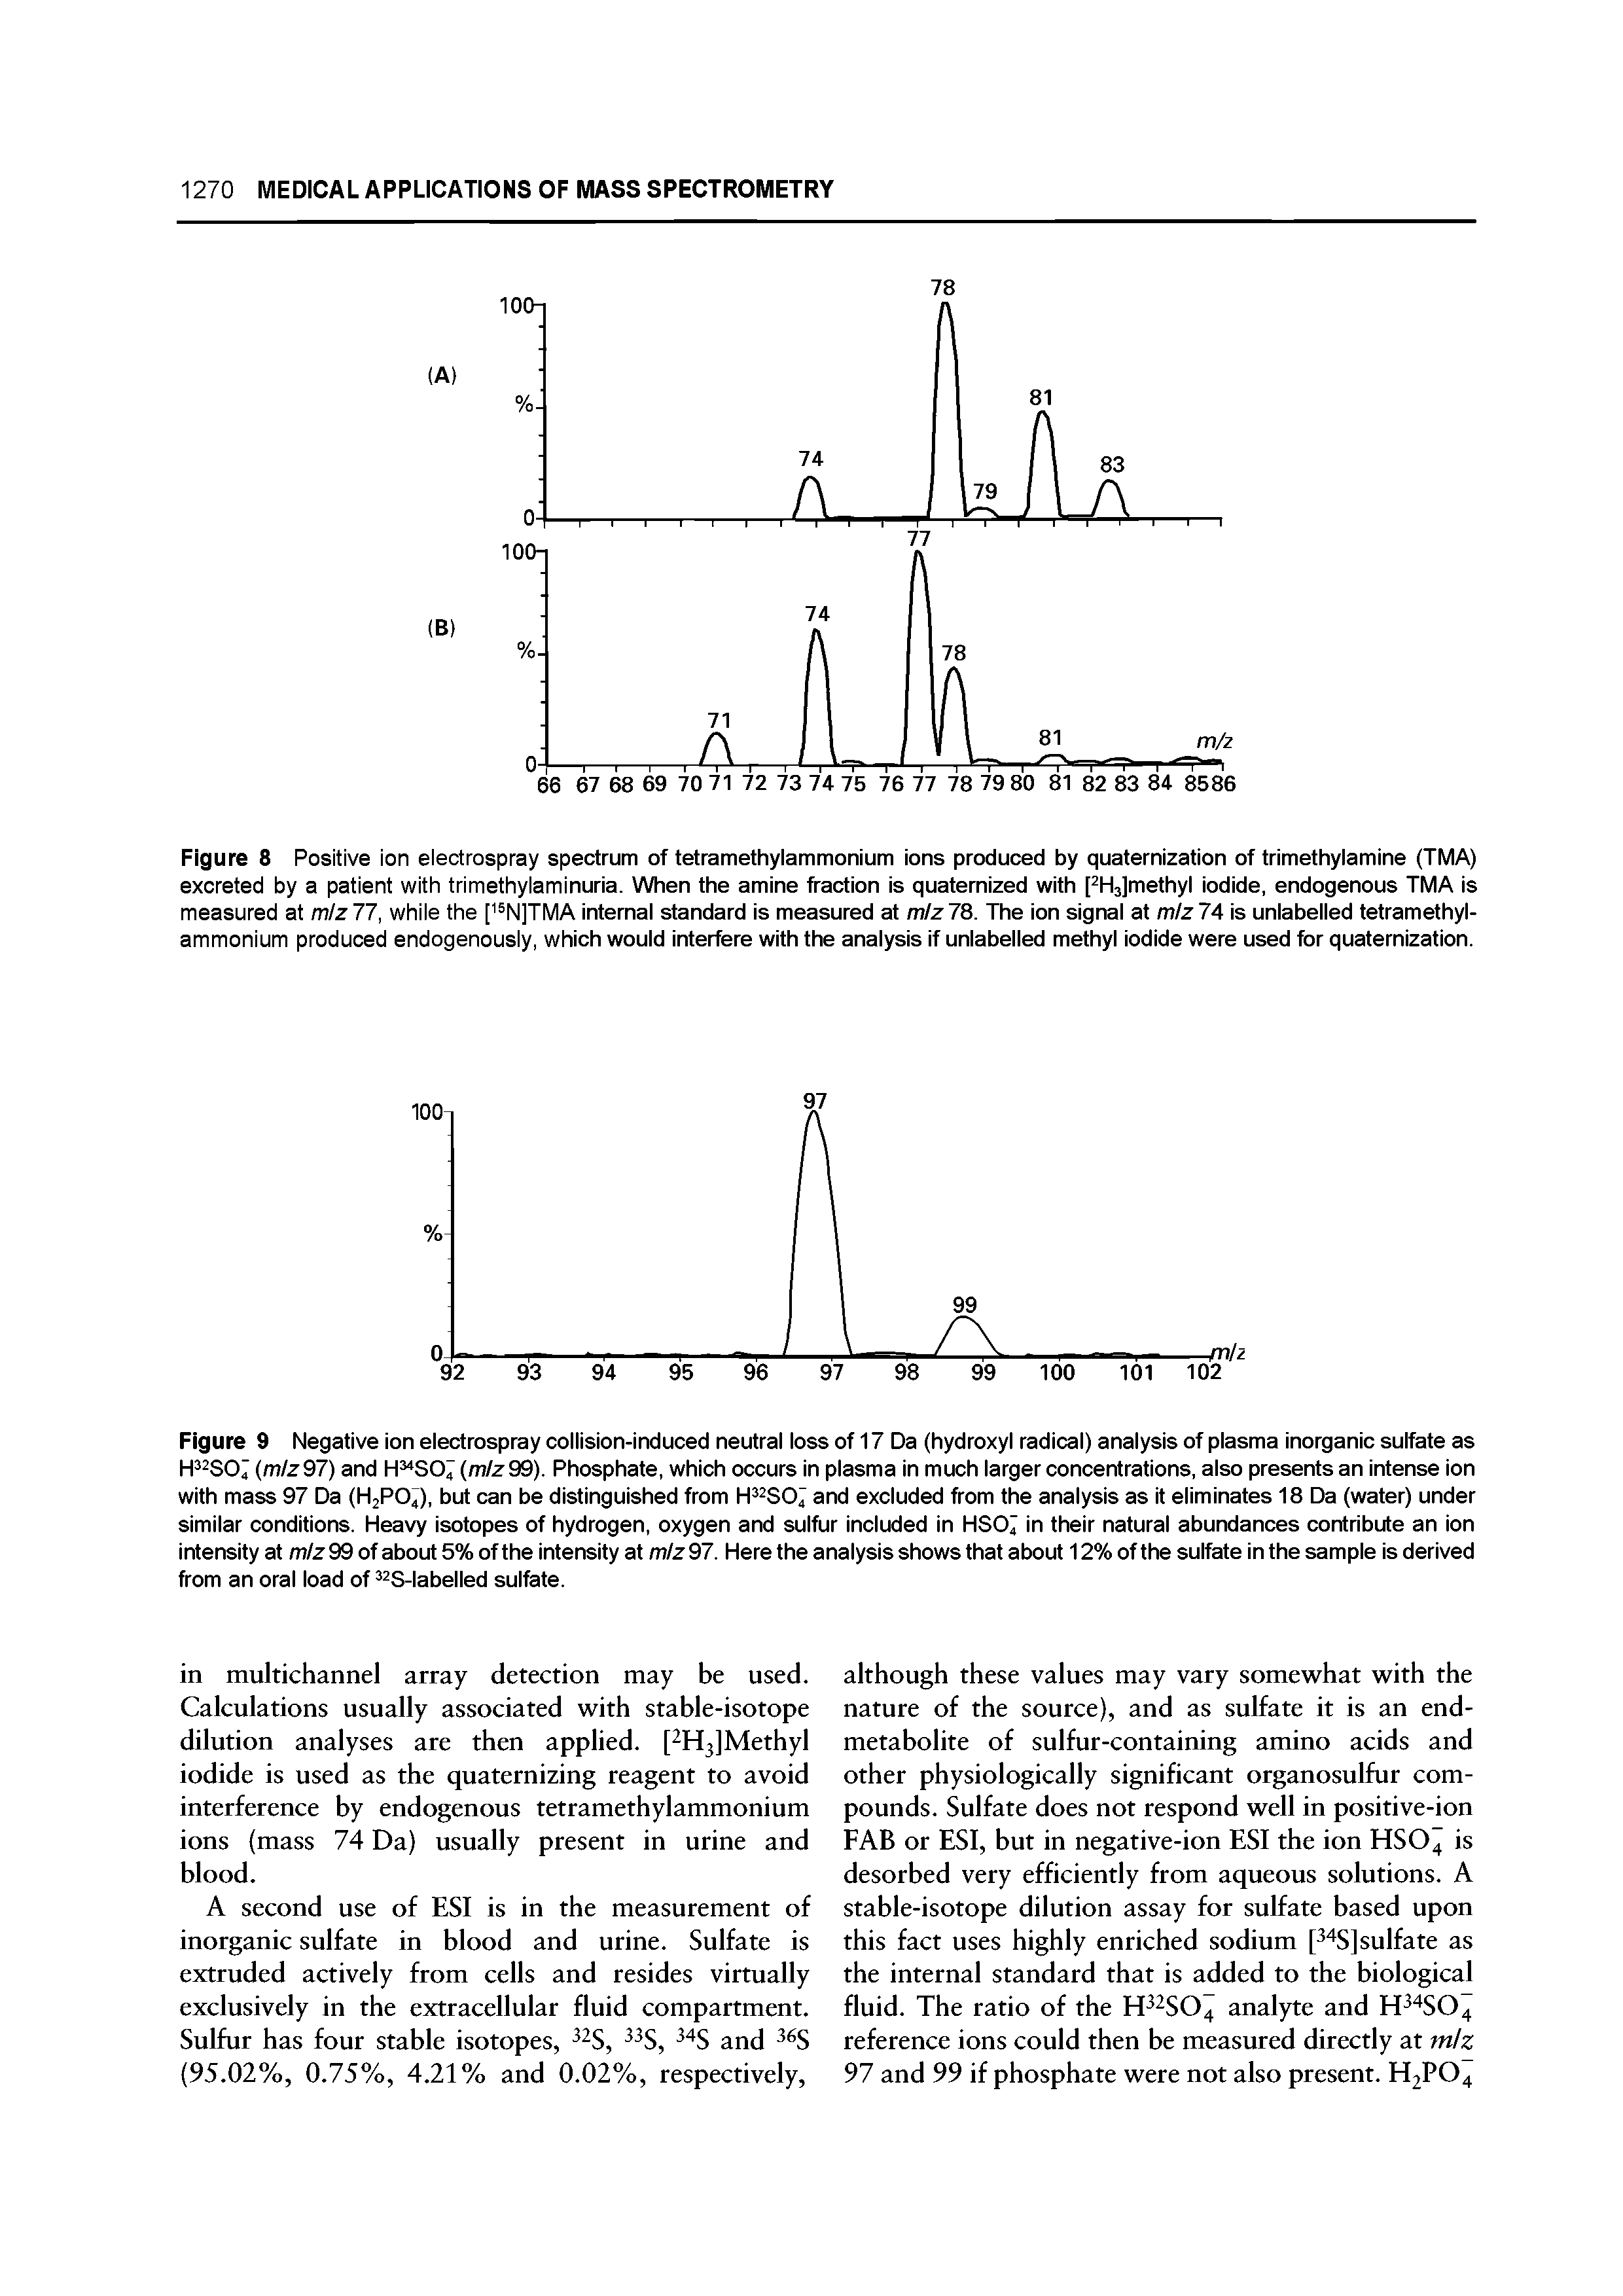 Figure 8 Positive ion eiectrospray spectrum of tetramethylammonium ions produced by quaternization of trimethylamine (TMA) excreted by a patient with trimethylaminuria. When the amine fraction is quatemized with pHsJmethyl iodide, endogenous TMA is measured at mlz77, while the [ N]TMA internal standard is measured at mlz7S. The ion signal at miz74 is unlabelled tetramethylammonium produced endogenously, which would interfere with the analysis if unlabelled methyl iodide were used for quaternization.